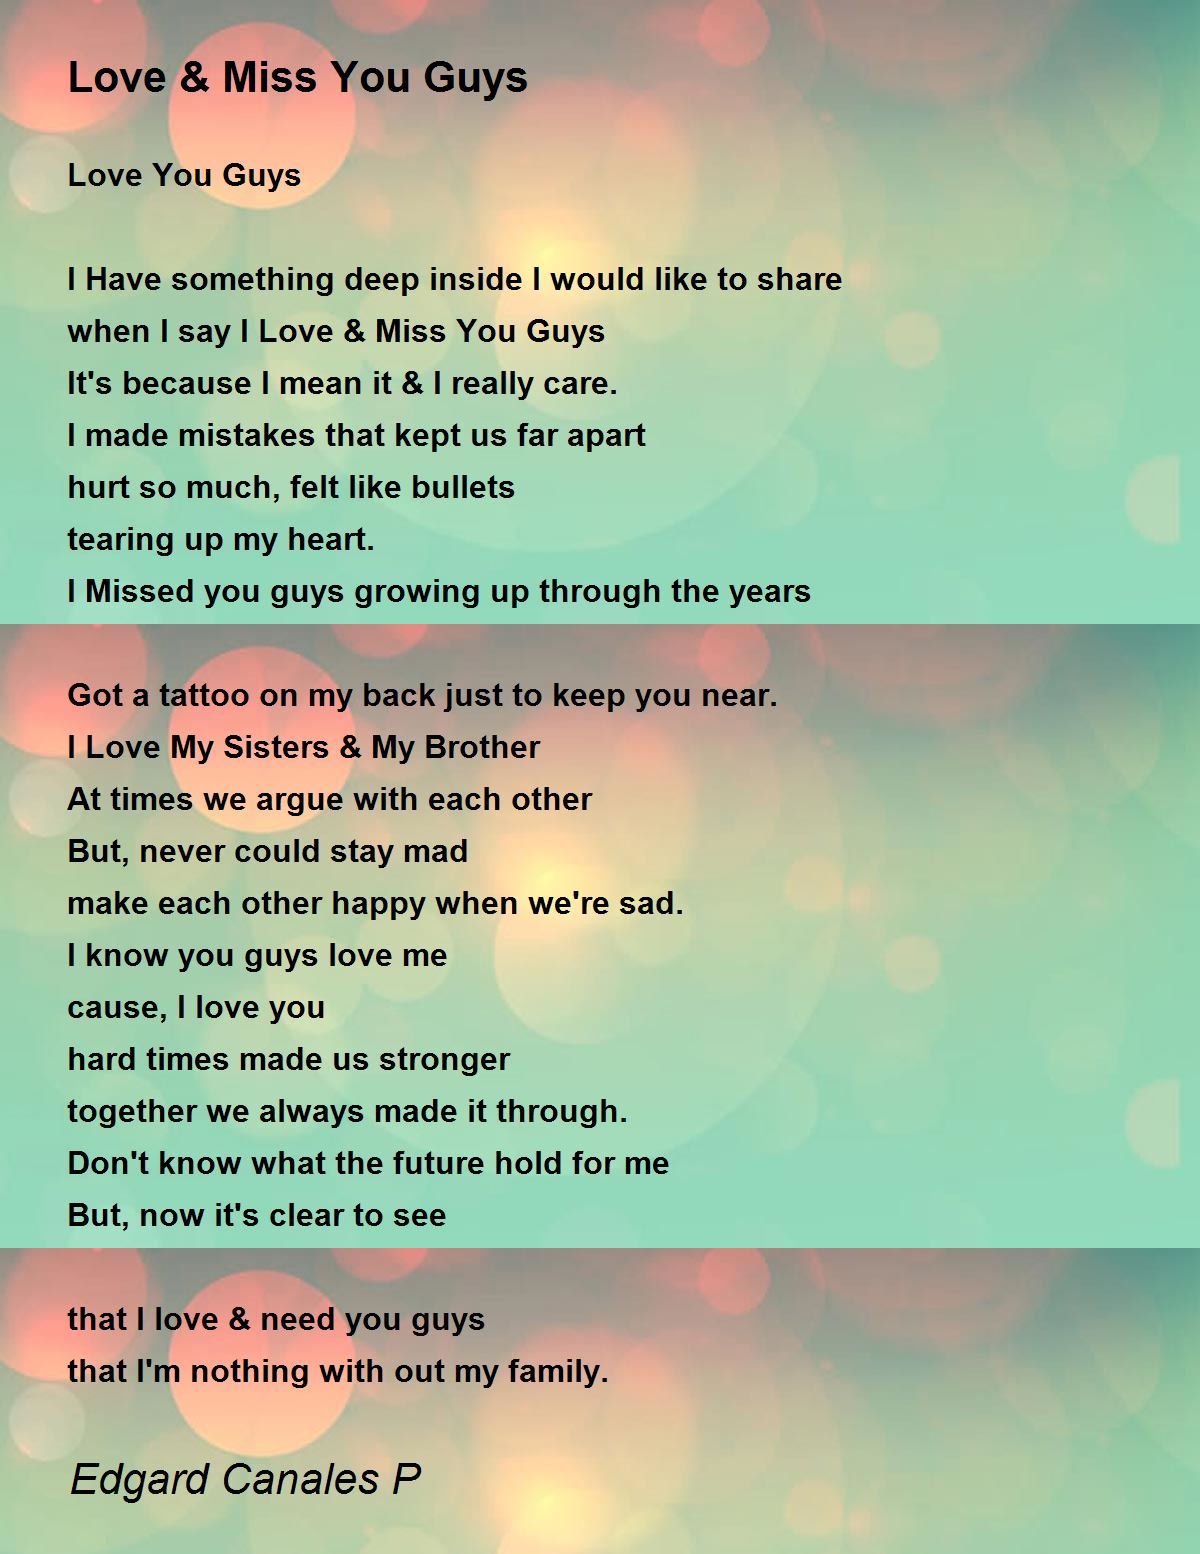 Love & Miss You Guys - Love & Miss You Guys Poem by Edgard Canales